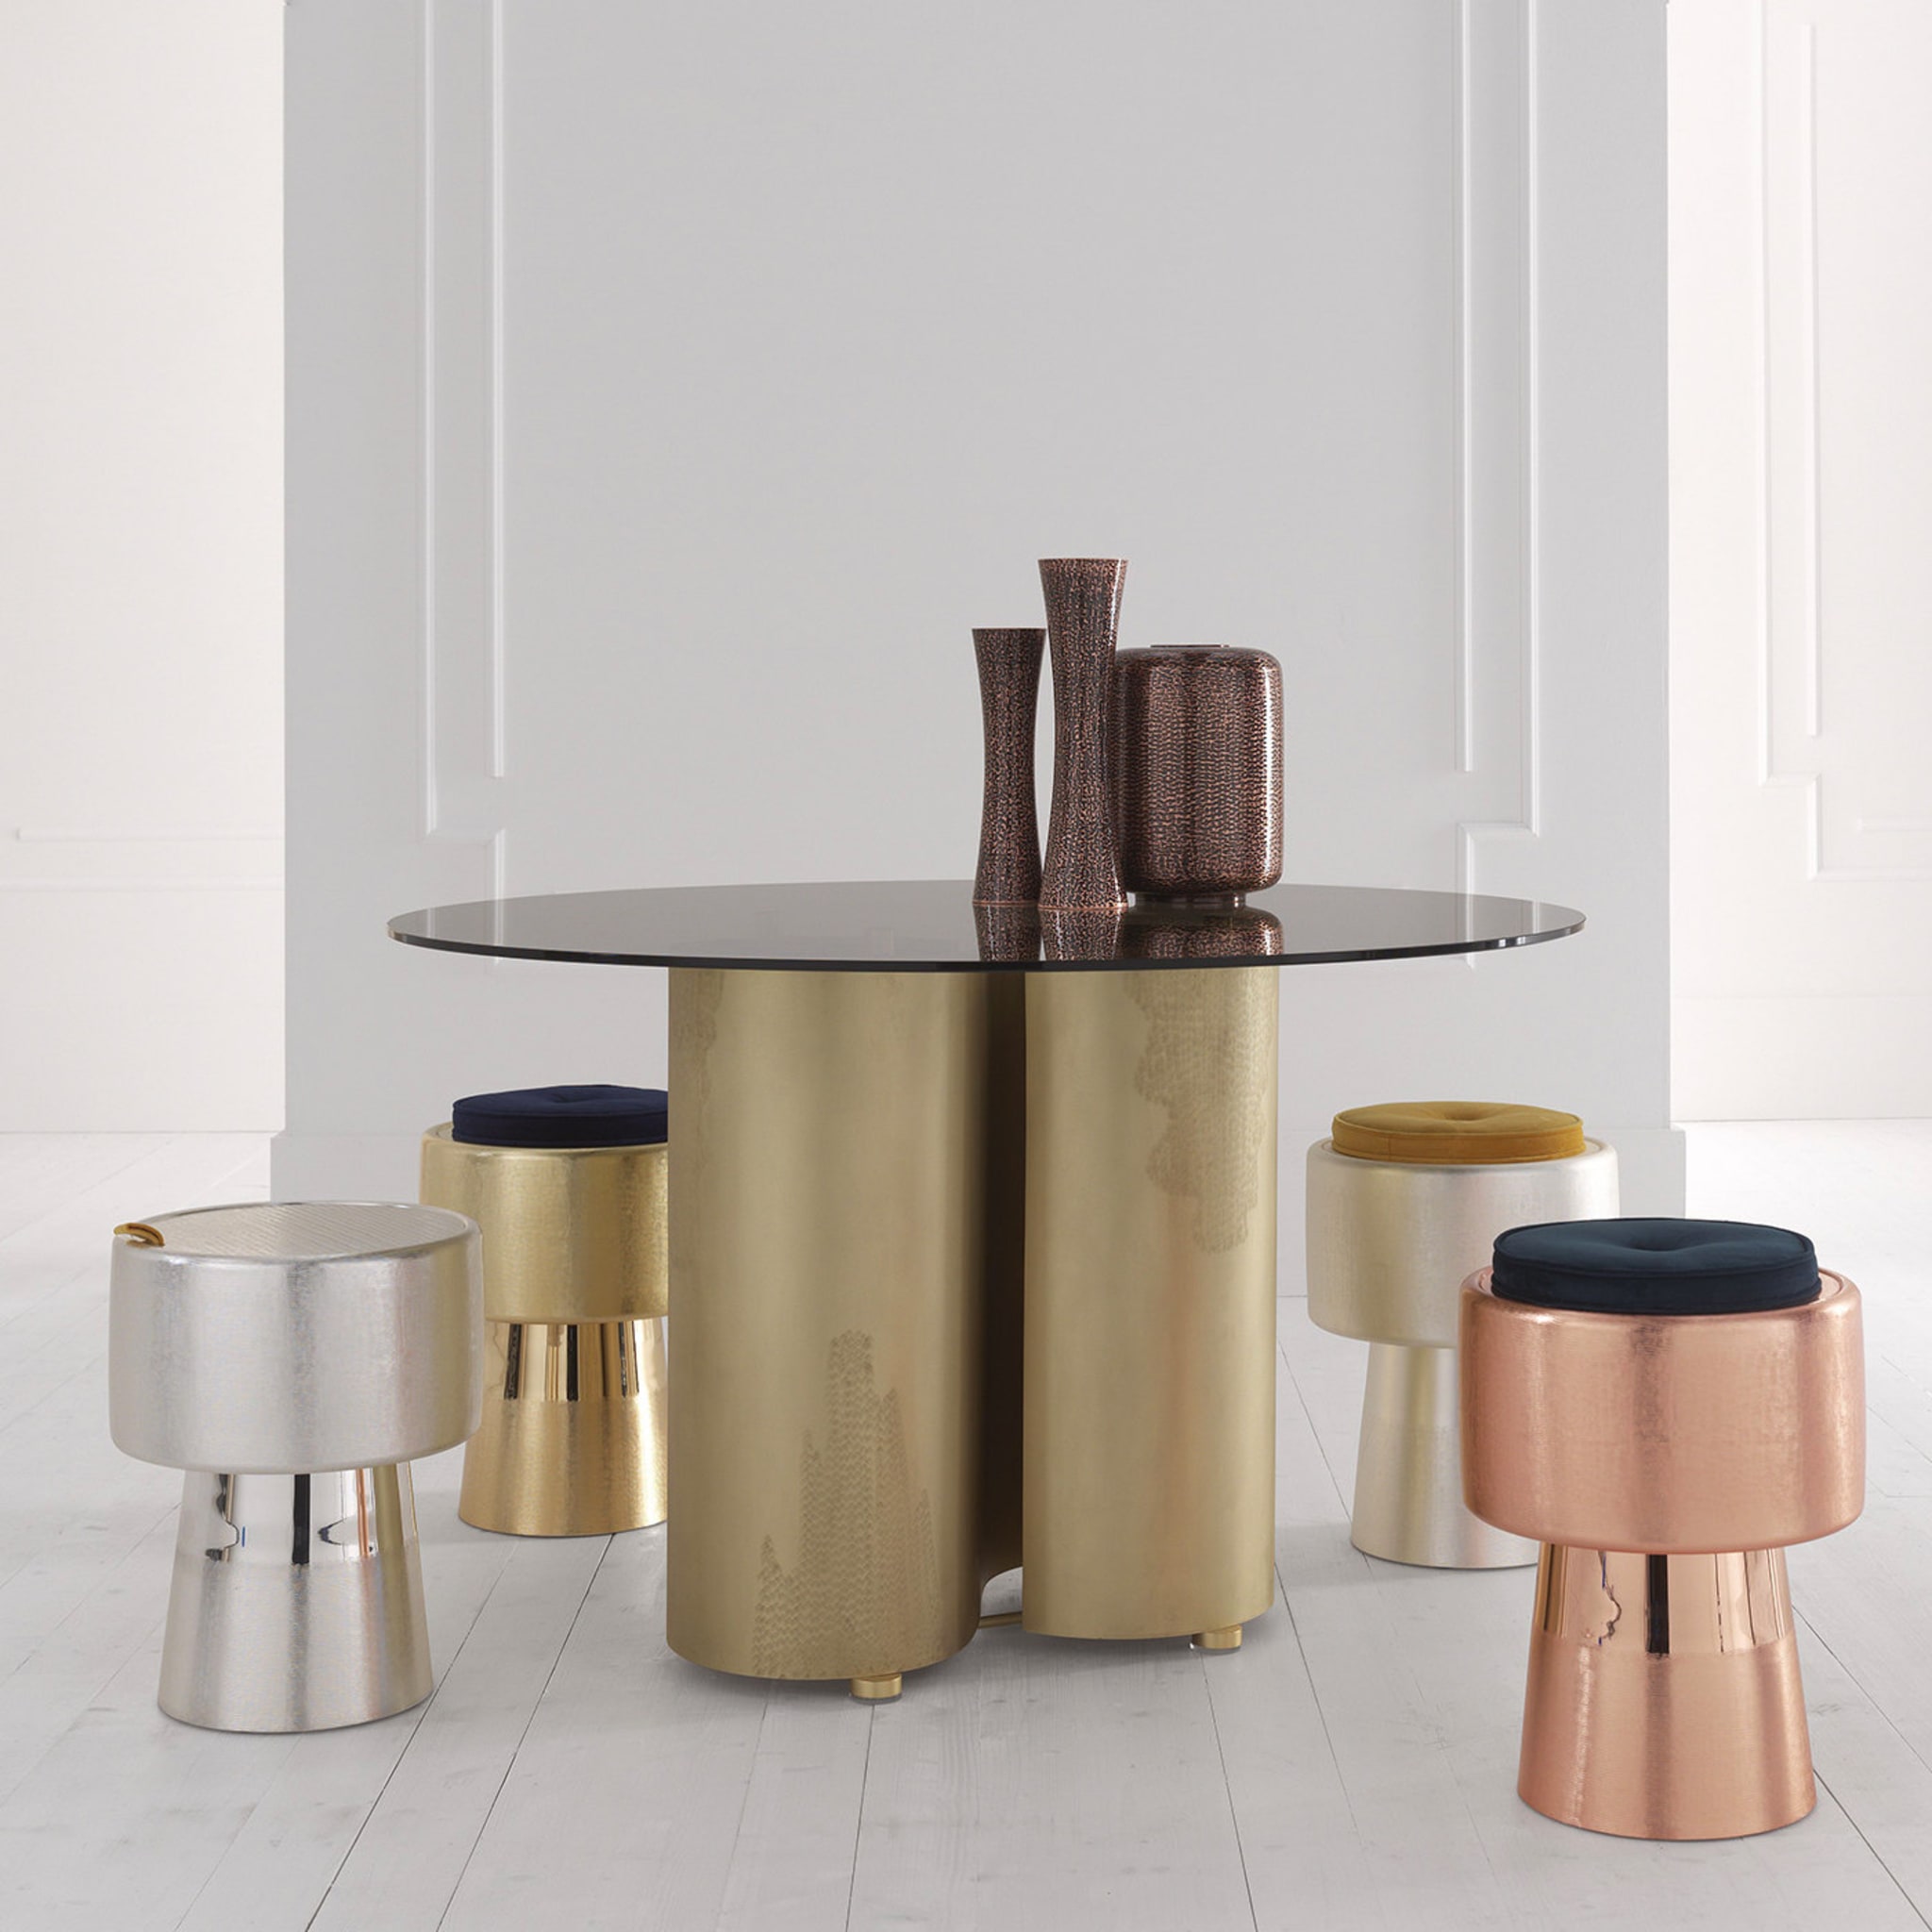 Tappo Bronze Stool by NOOII - Alternative view 3